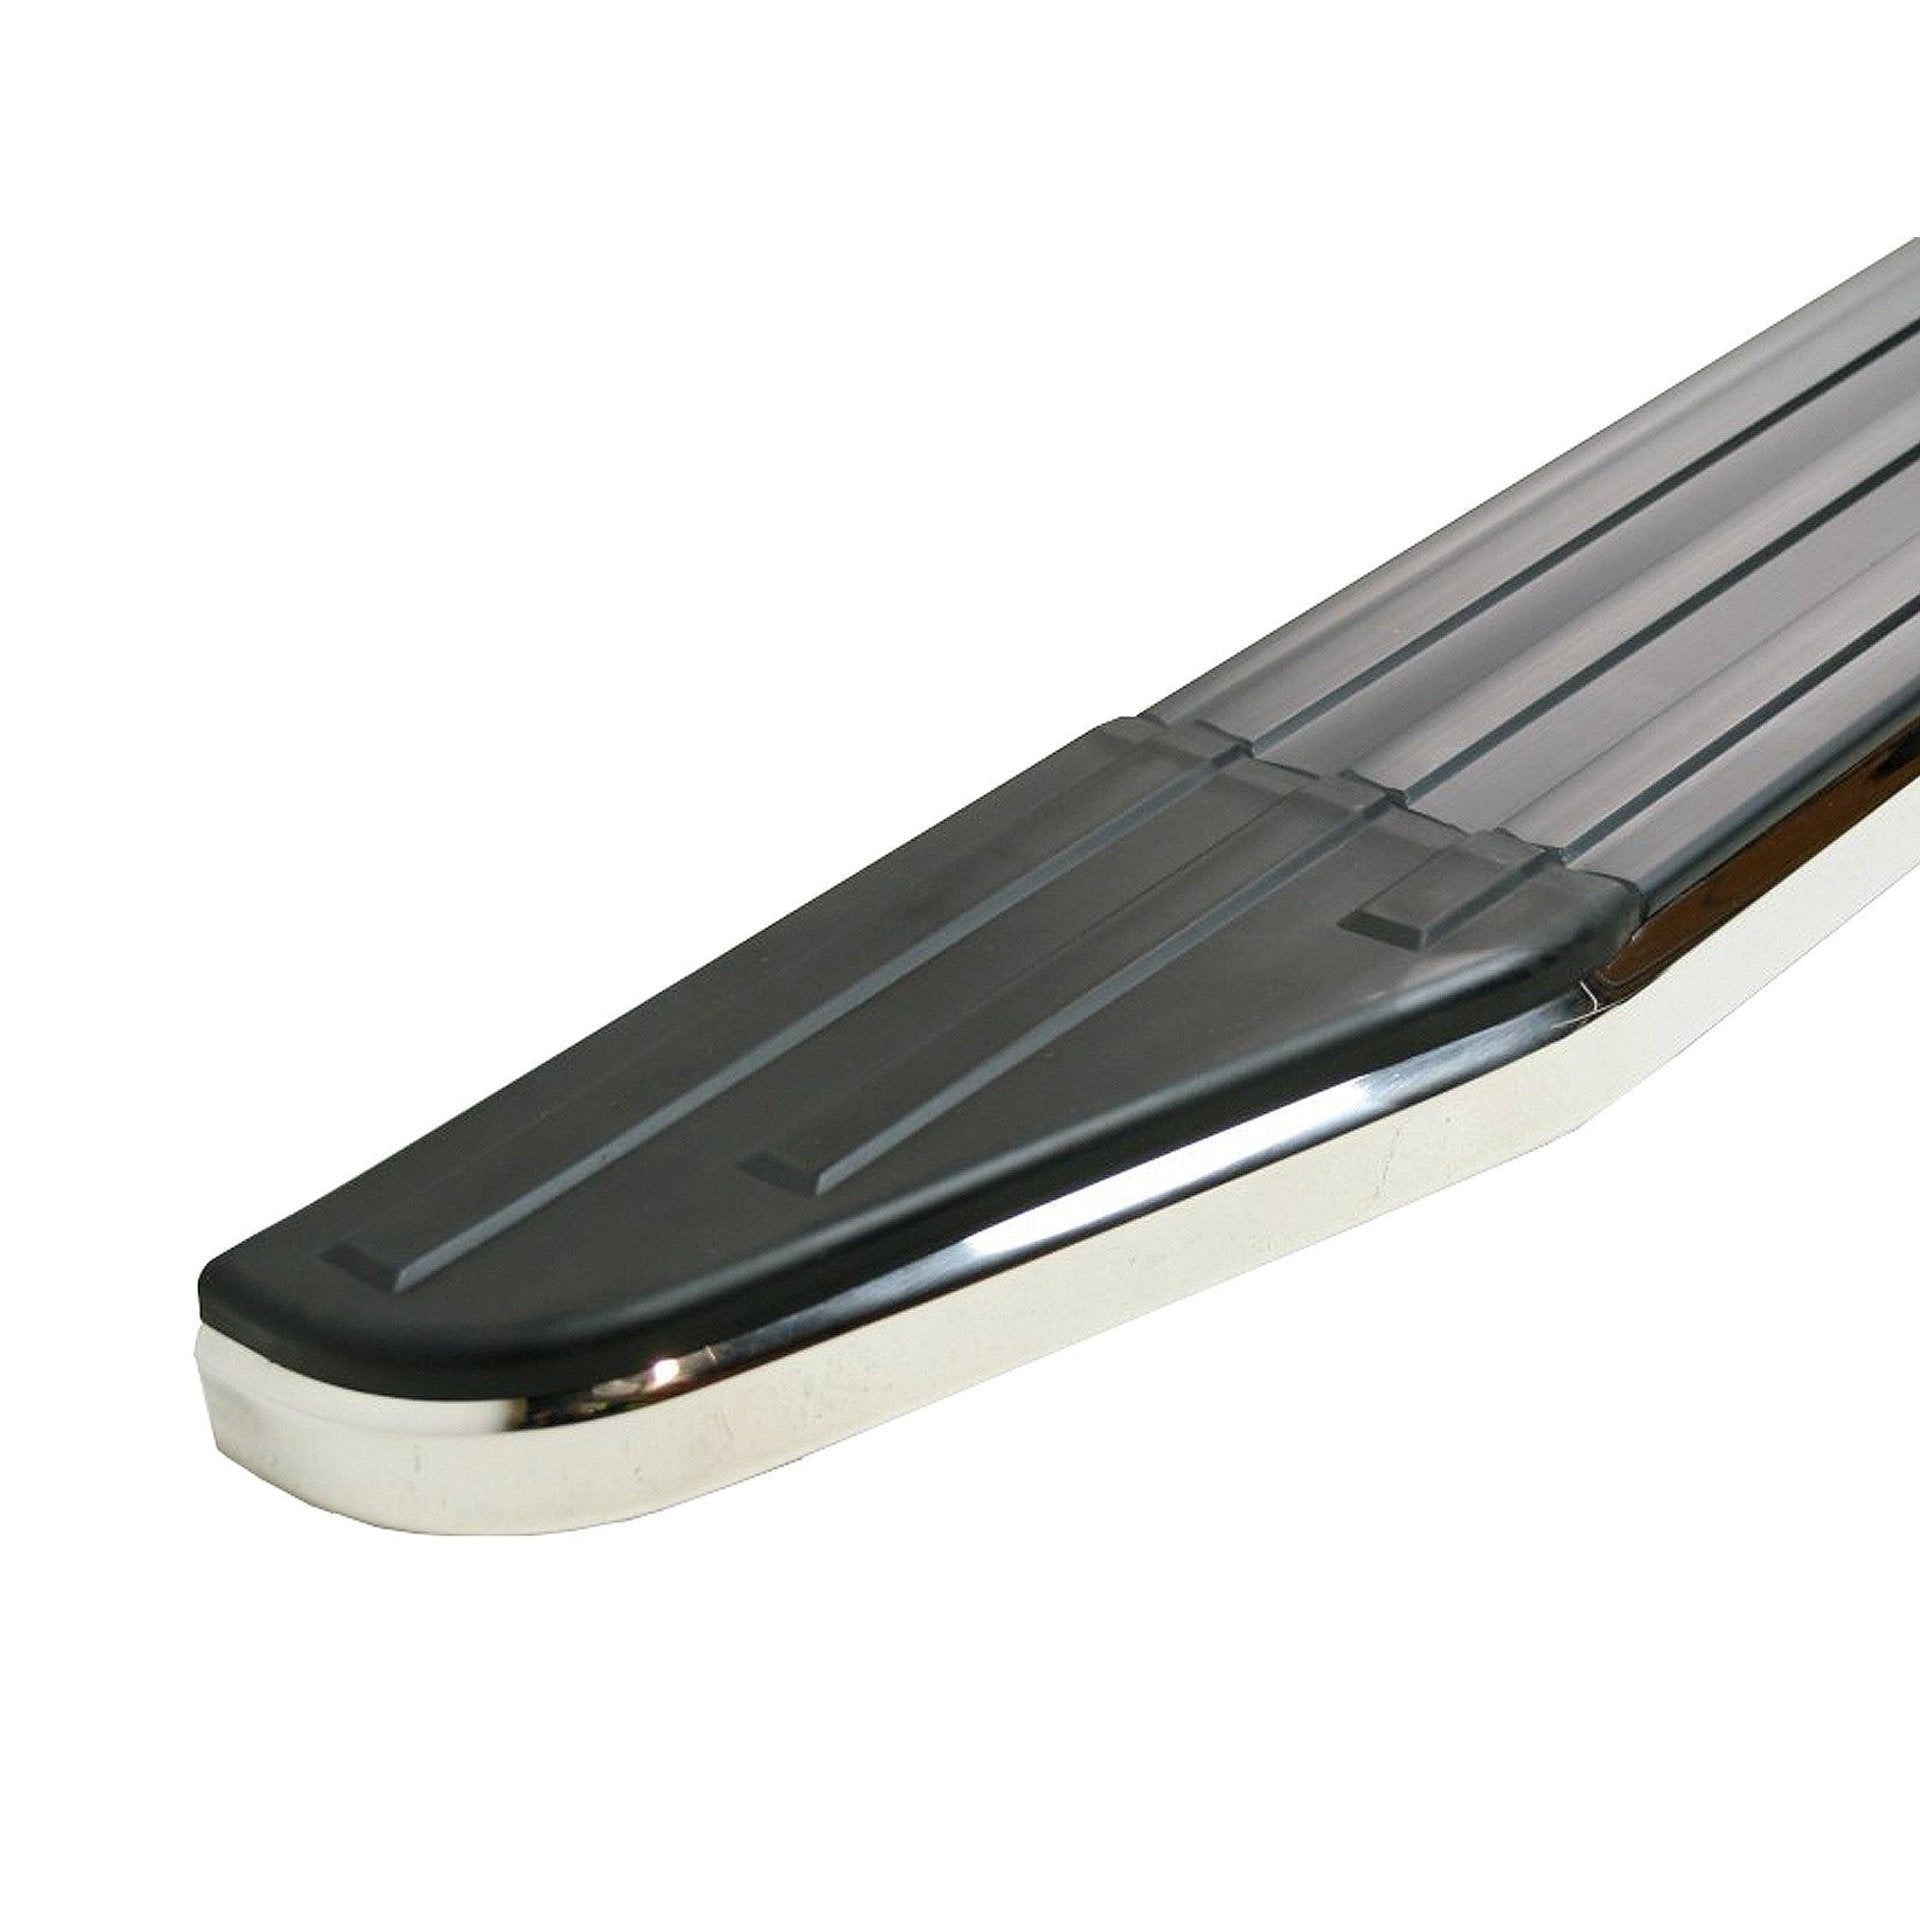 Raptor Side Steps Running Boards for Vauxhall Opel Mokka 2012-2019 -  - sold by Direct4x4